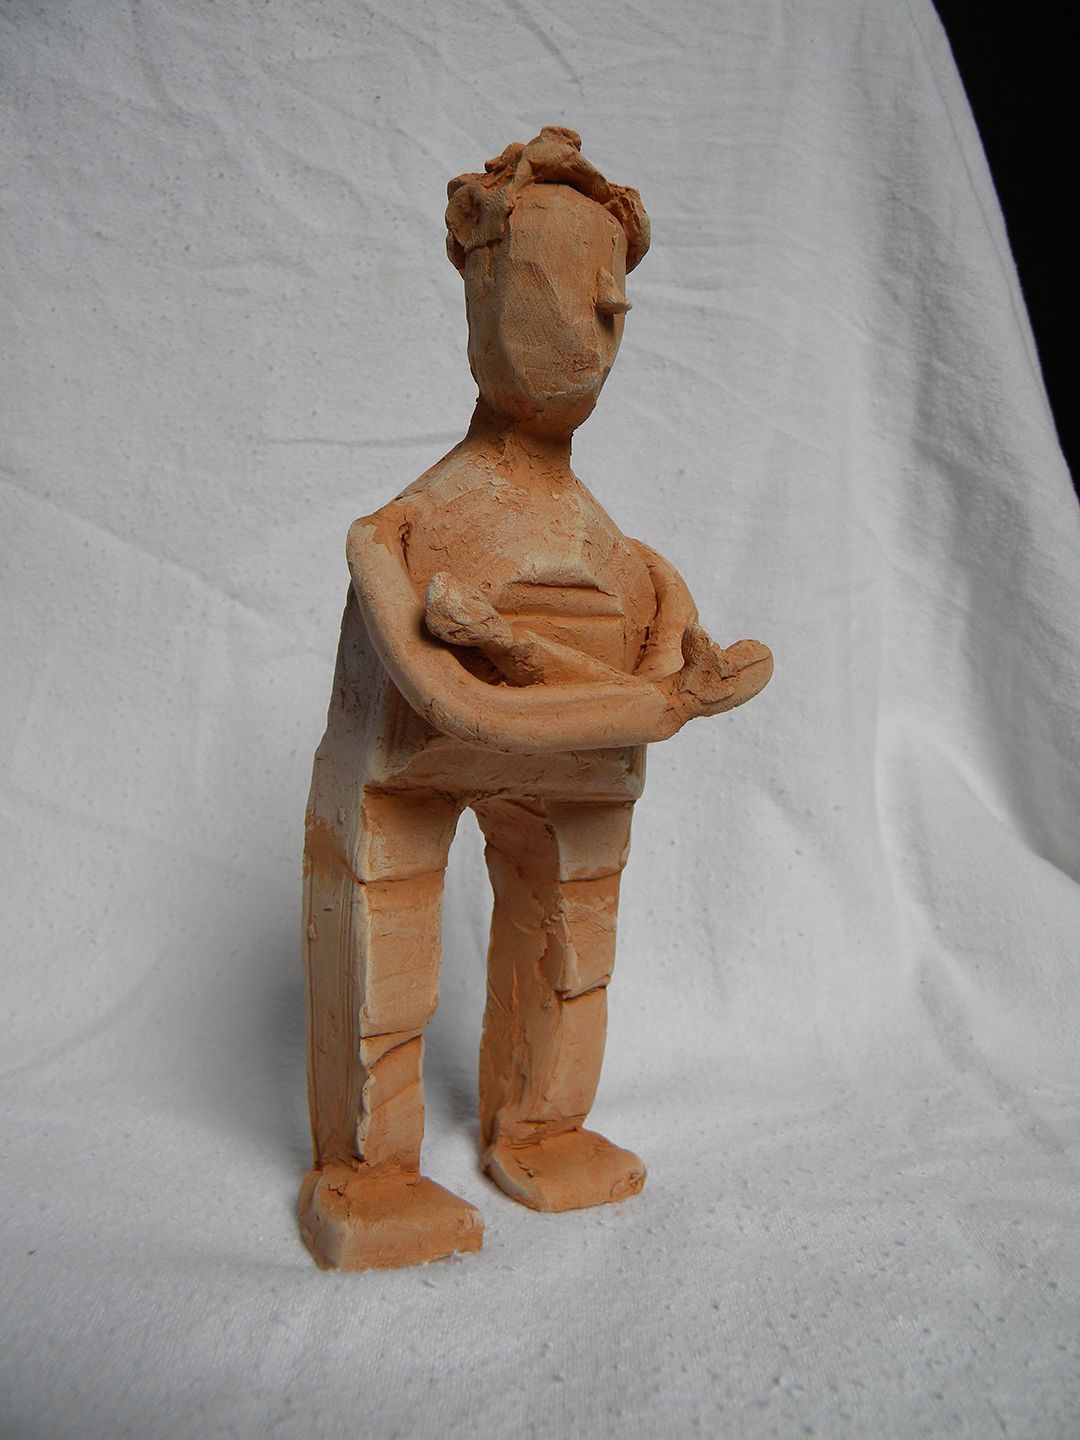 Sketch of a character in clay.